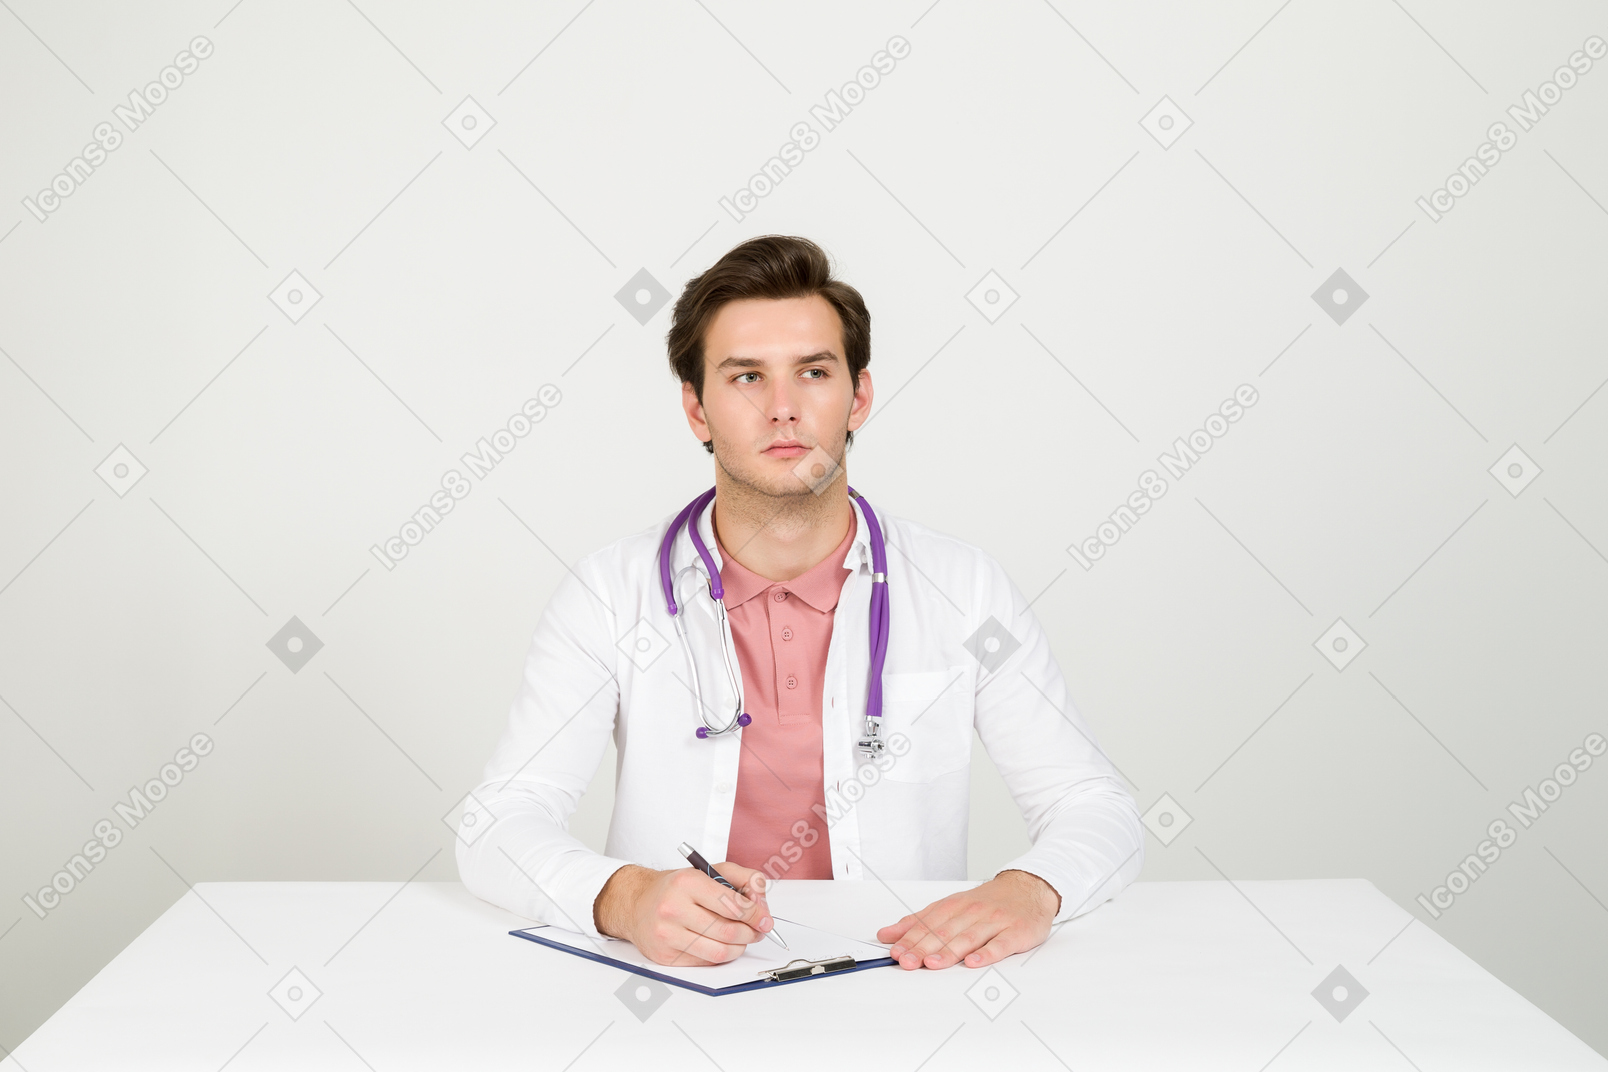 Doctor's work requires maximum attention